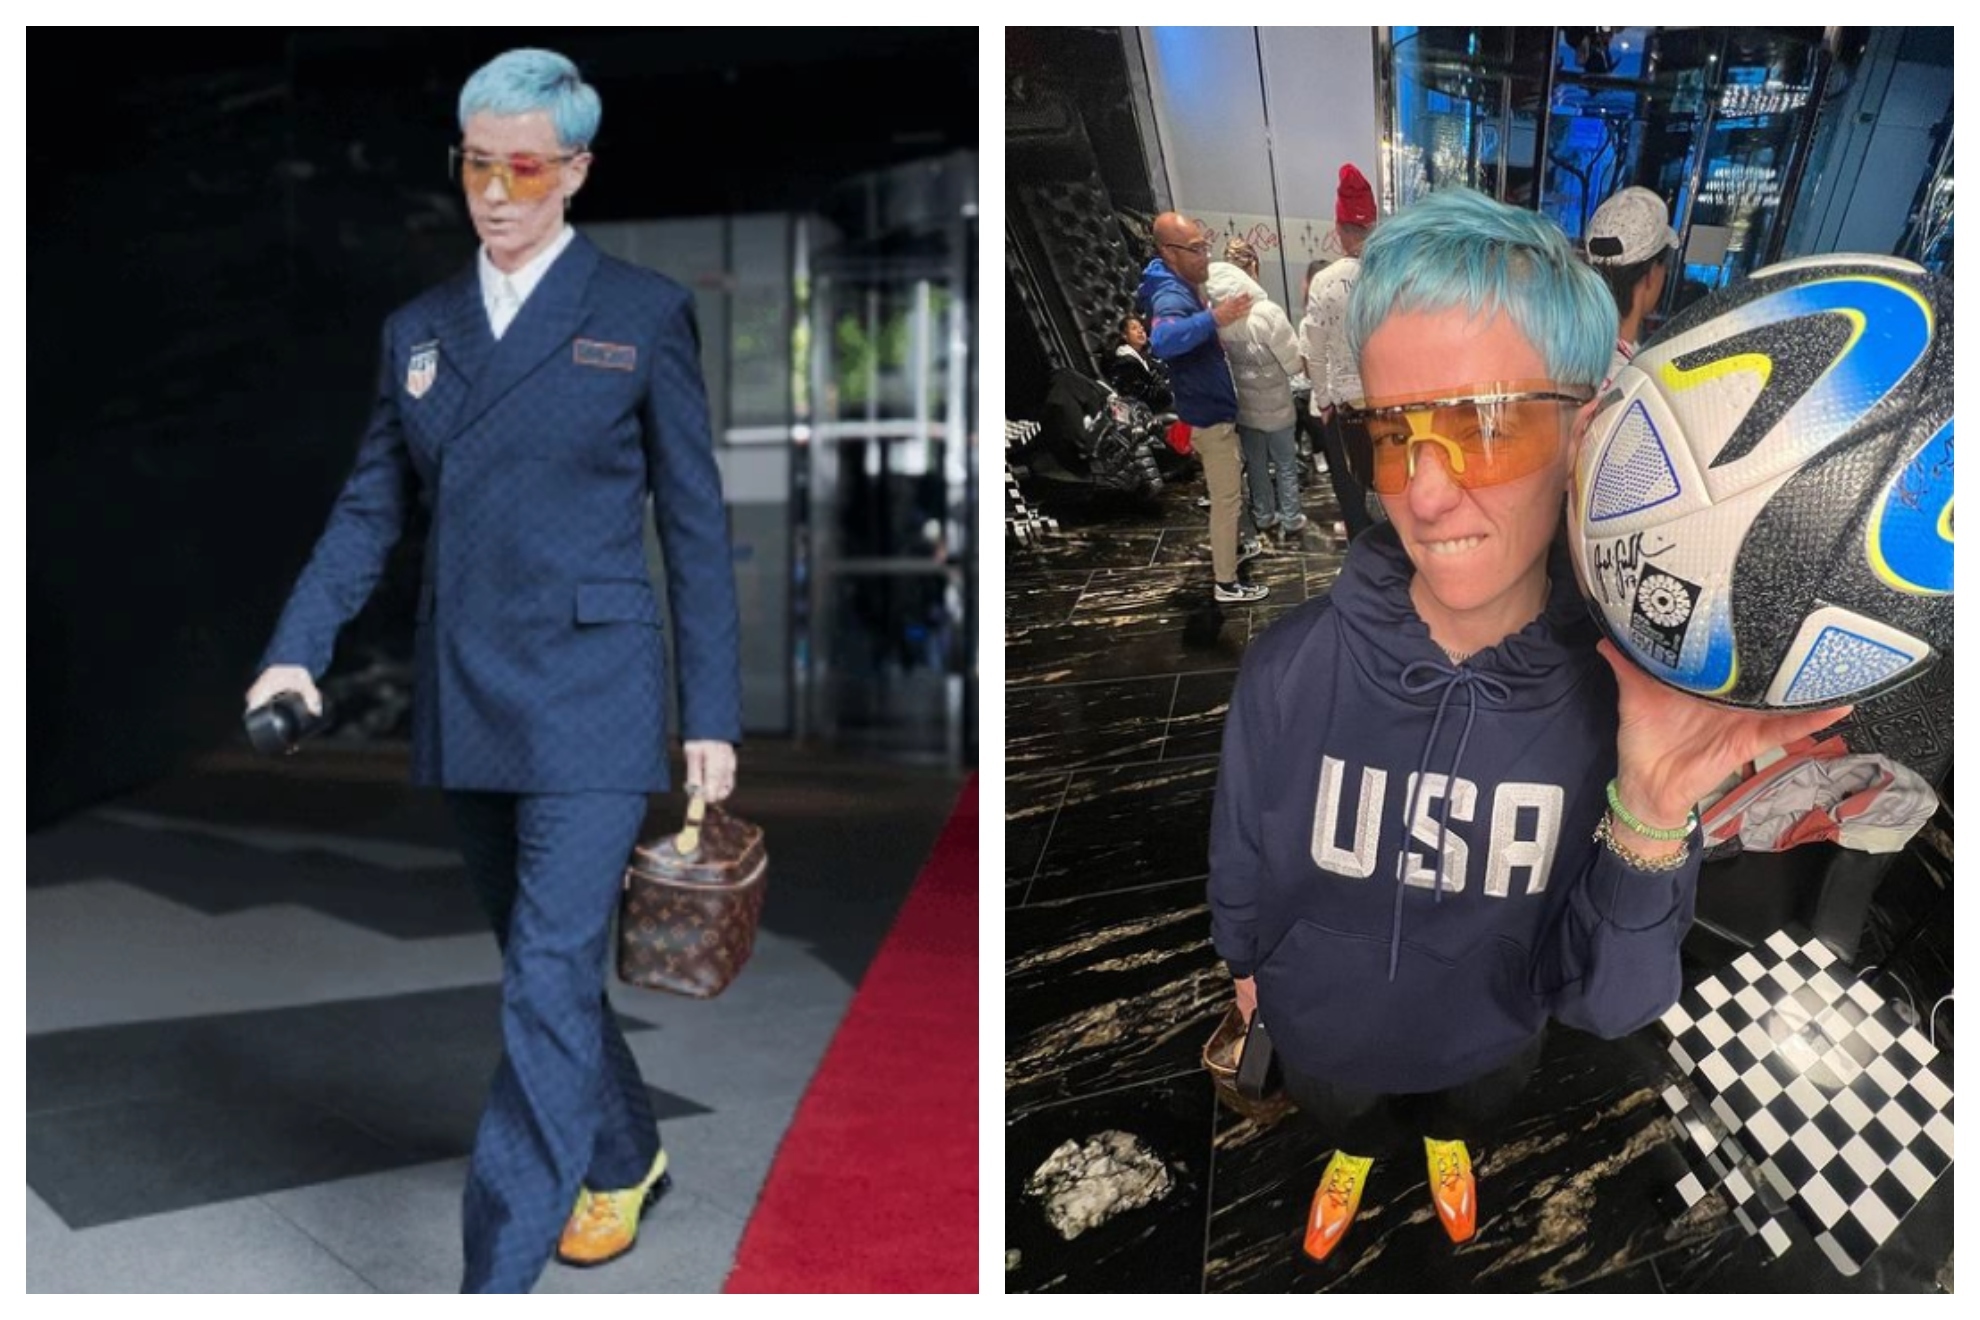 Megan Rapinoe reveals the unexpected pop star that inspired her new hair color at the World Cup